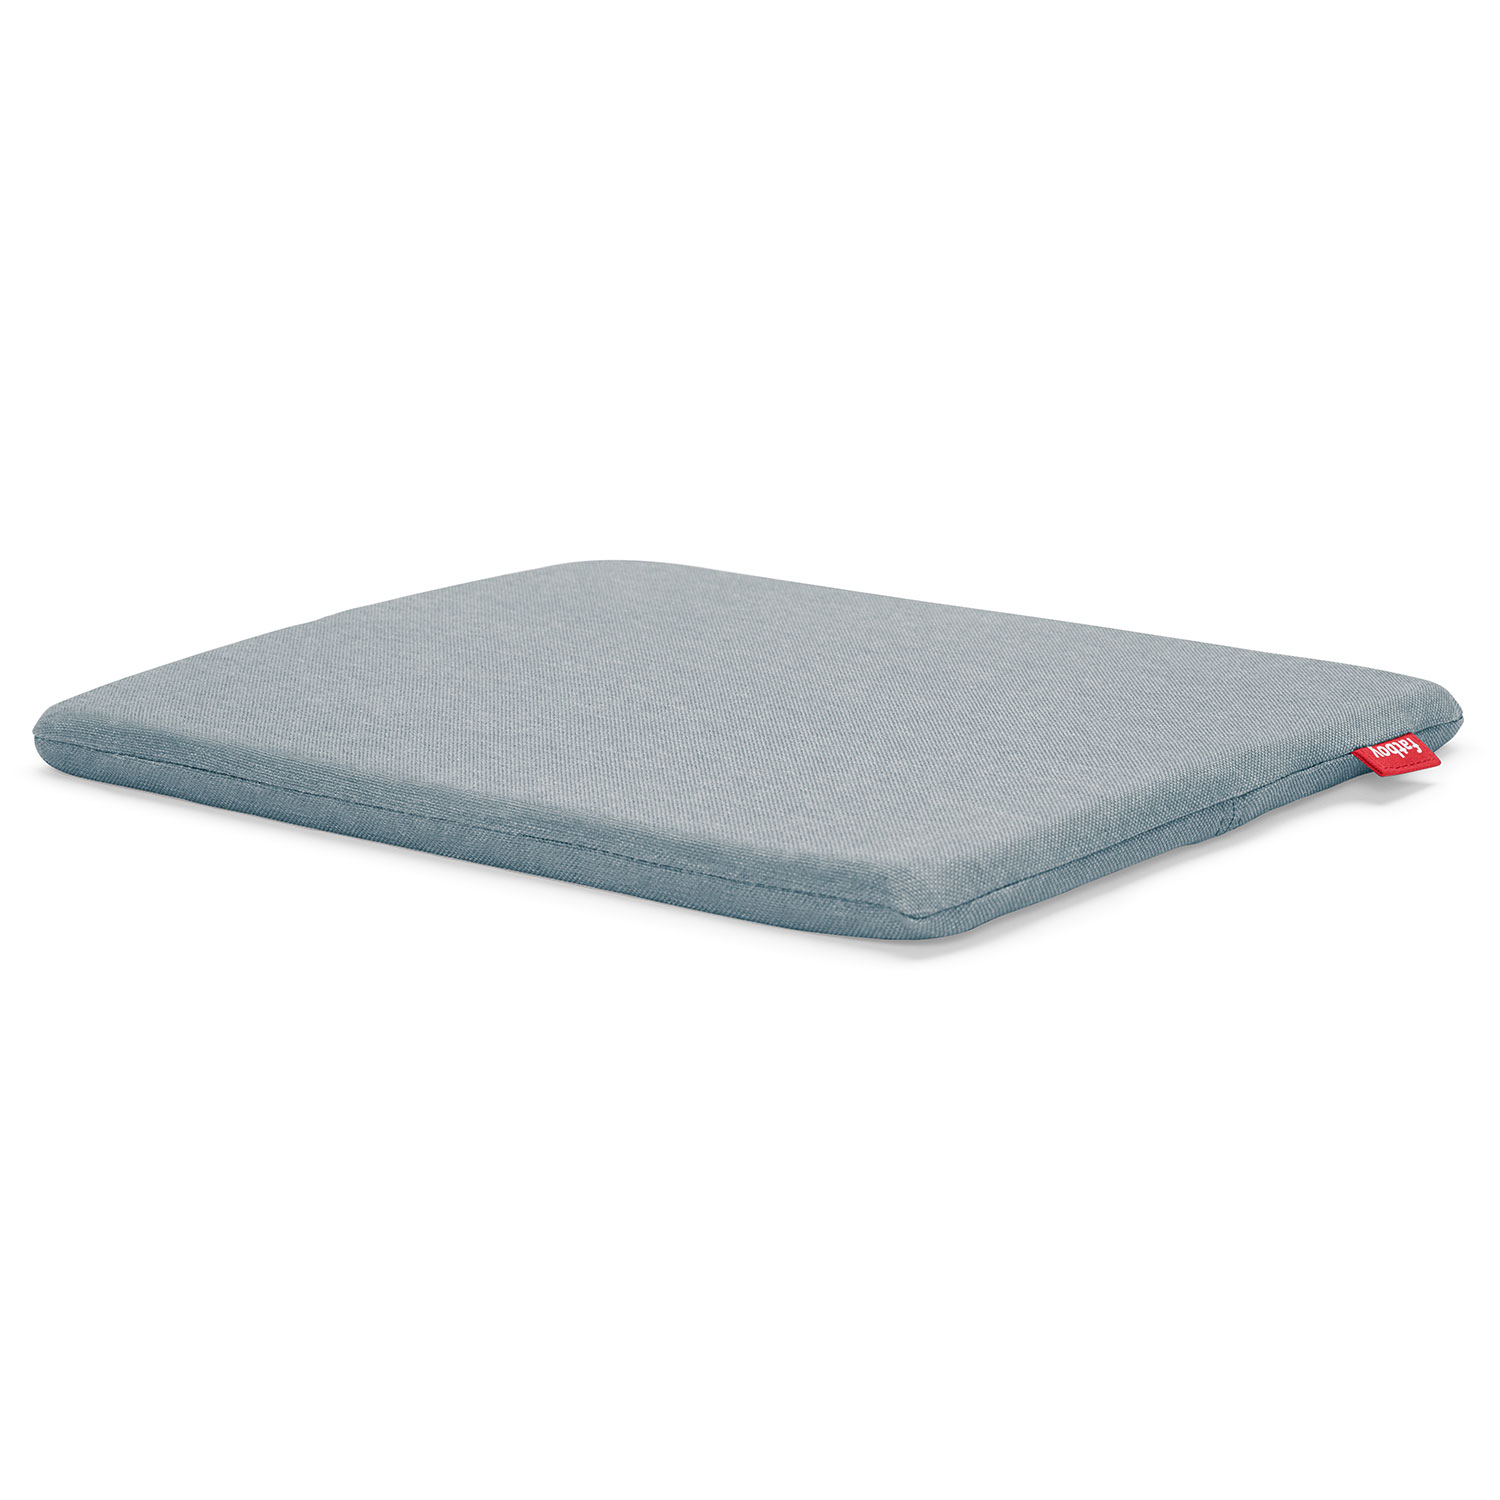 Concrete seat pillow recycled storm blue